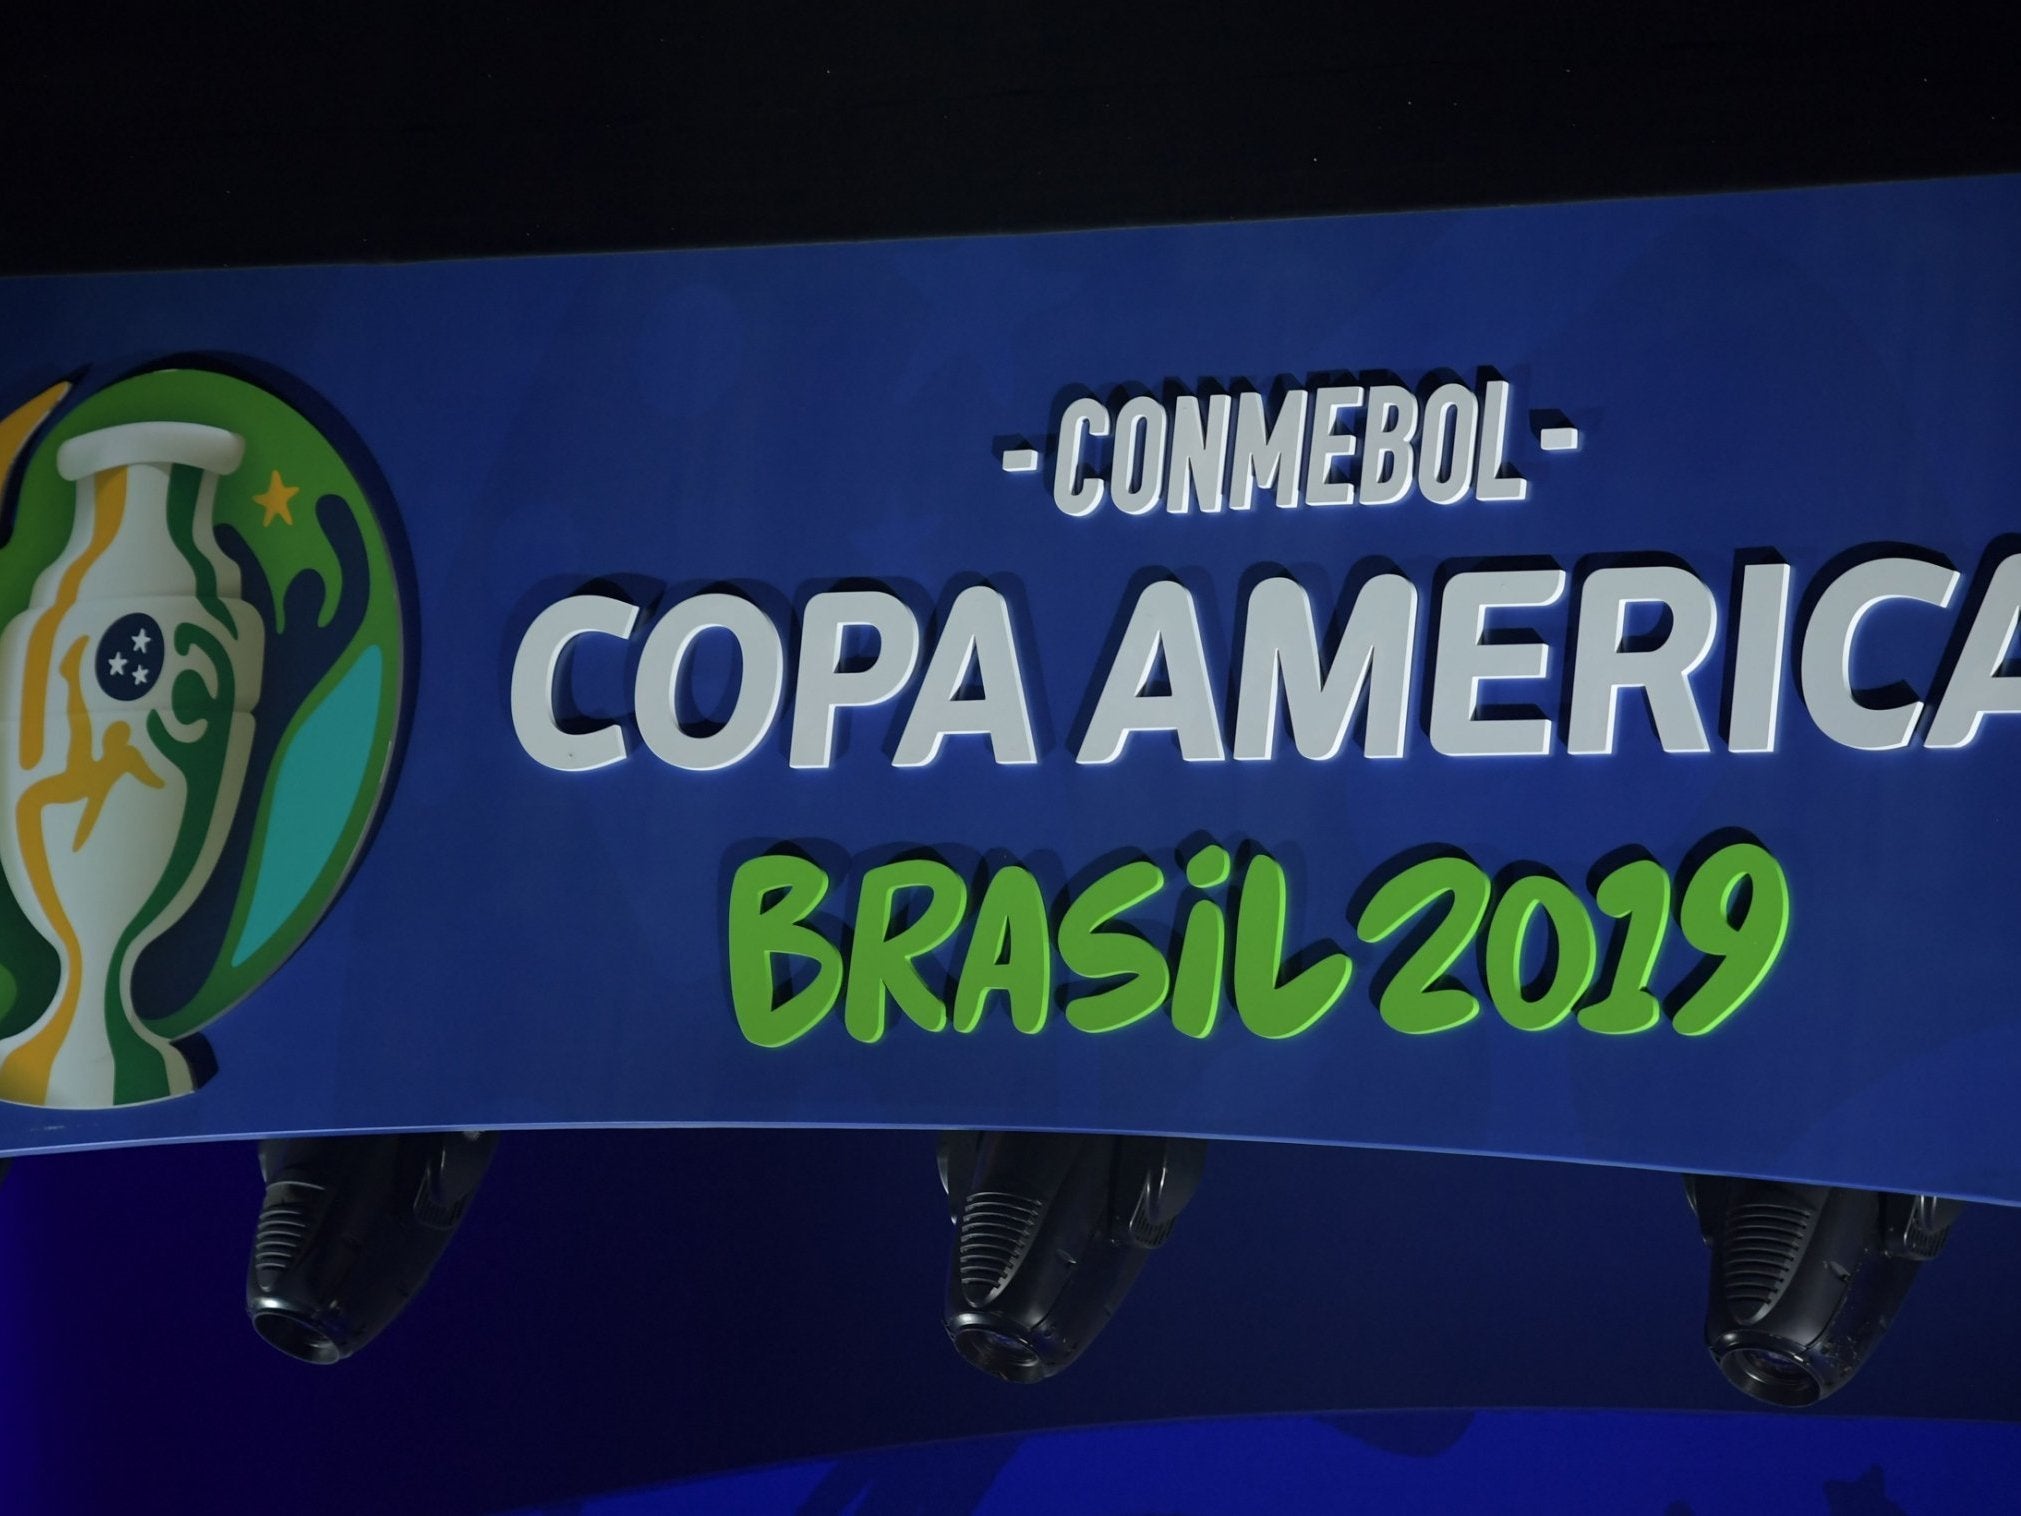 The 2019 Copa America will be hosted by Brazil